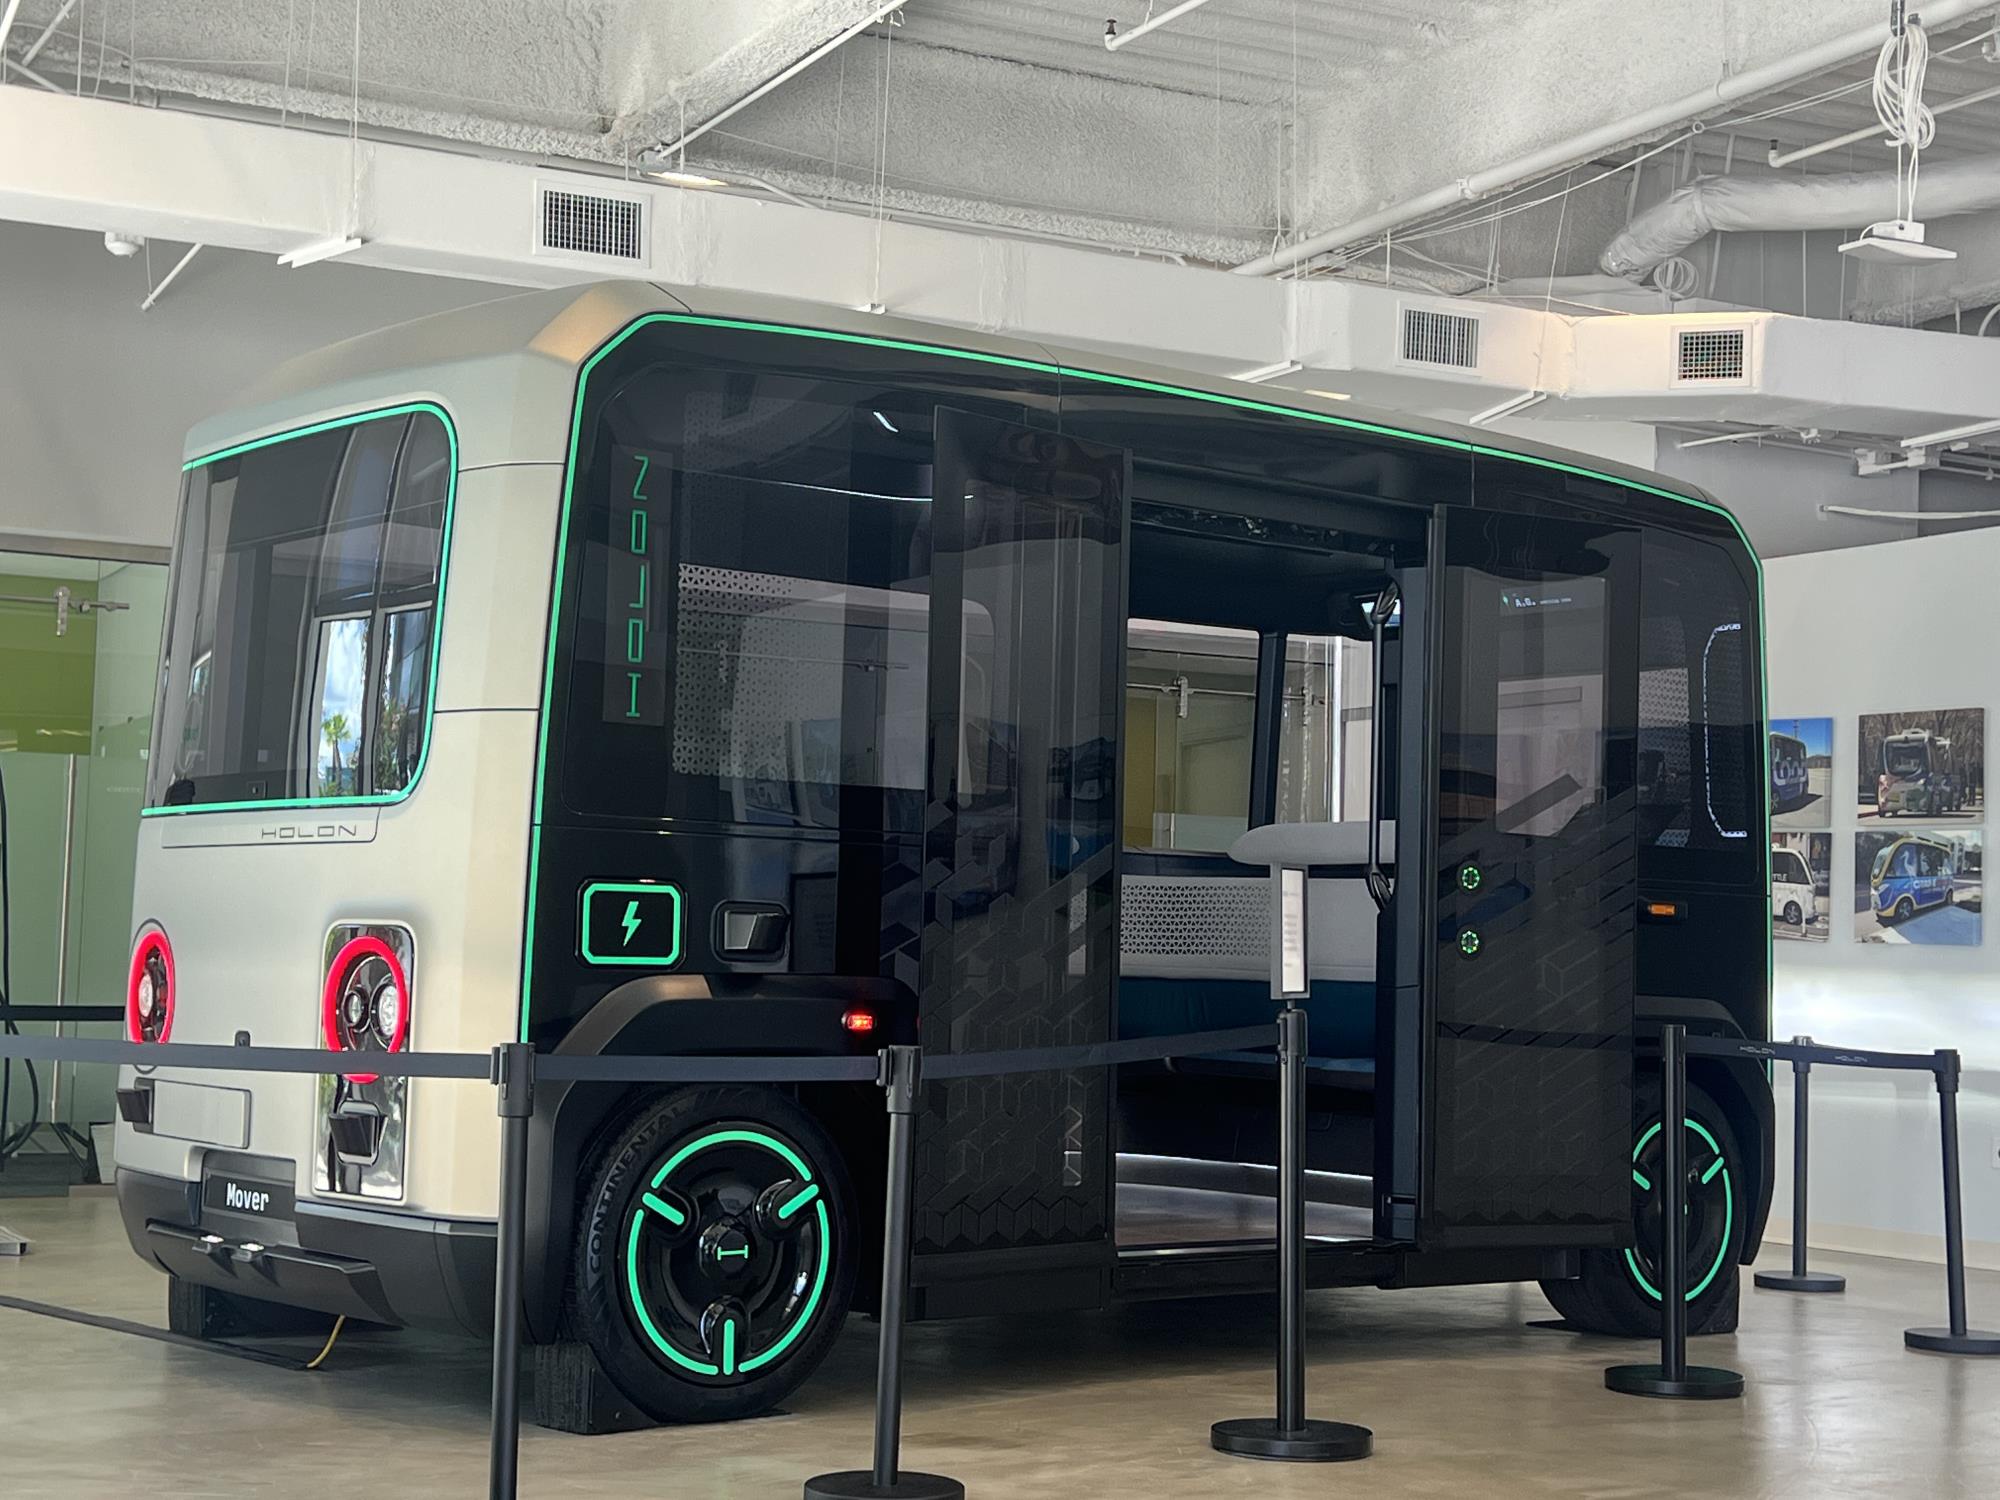 With autonomous vehicles for public transit becoming a reality close to home, Clay County leaders look at possibilities for their communities